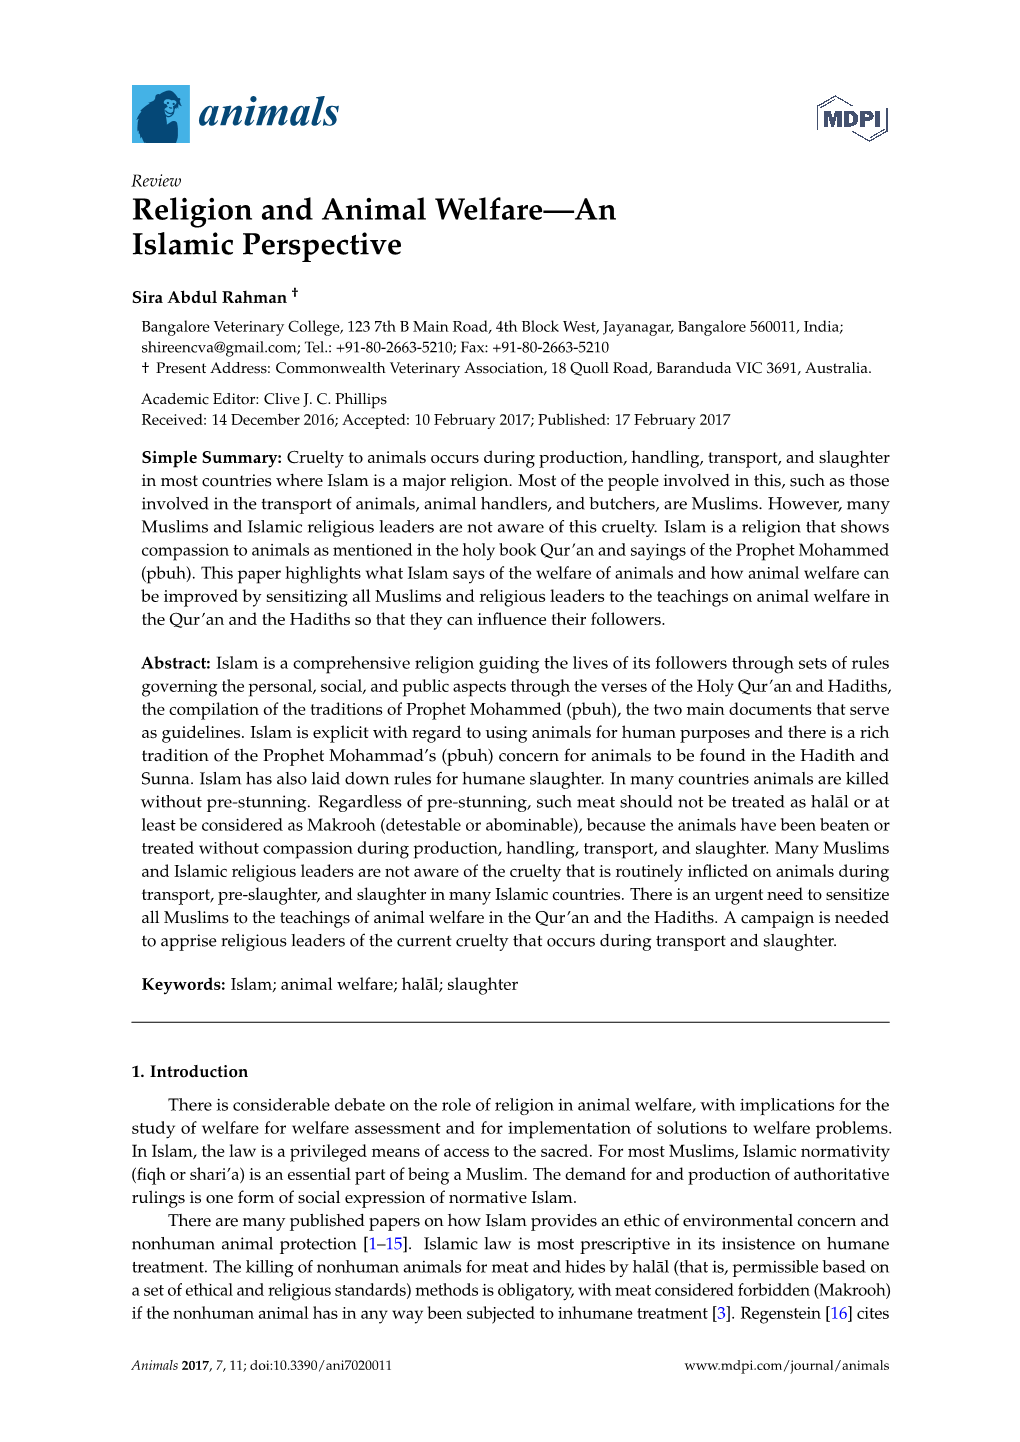 Religion and Animal Welfare—An Islamic Perspective